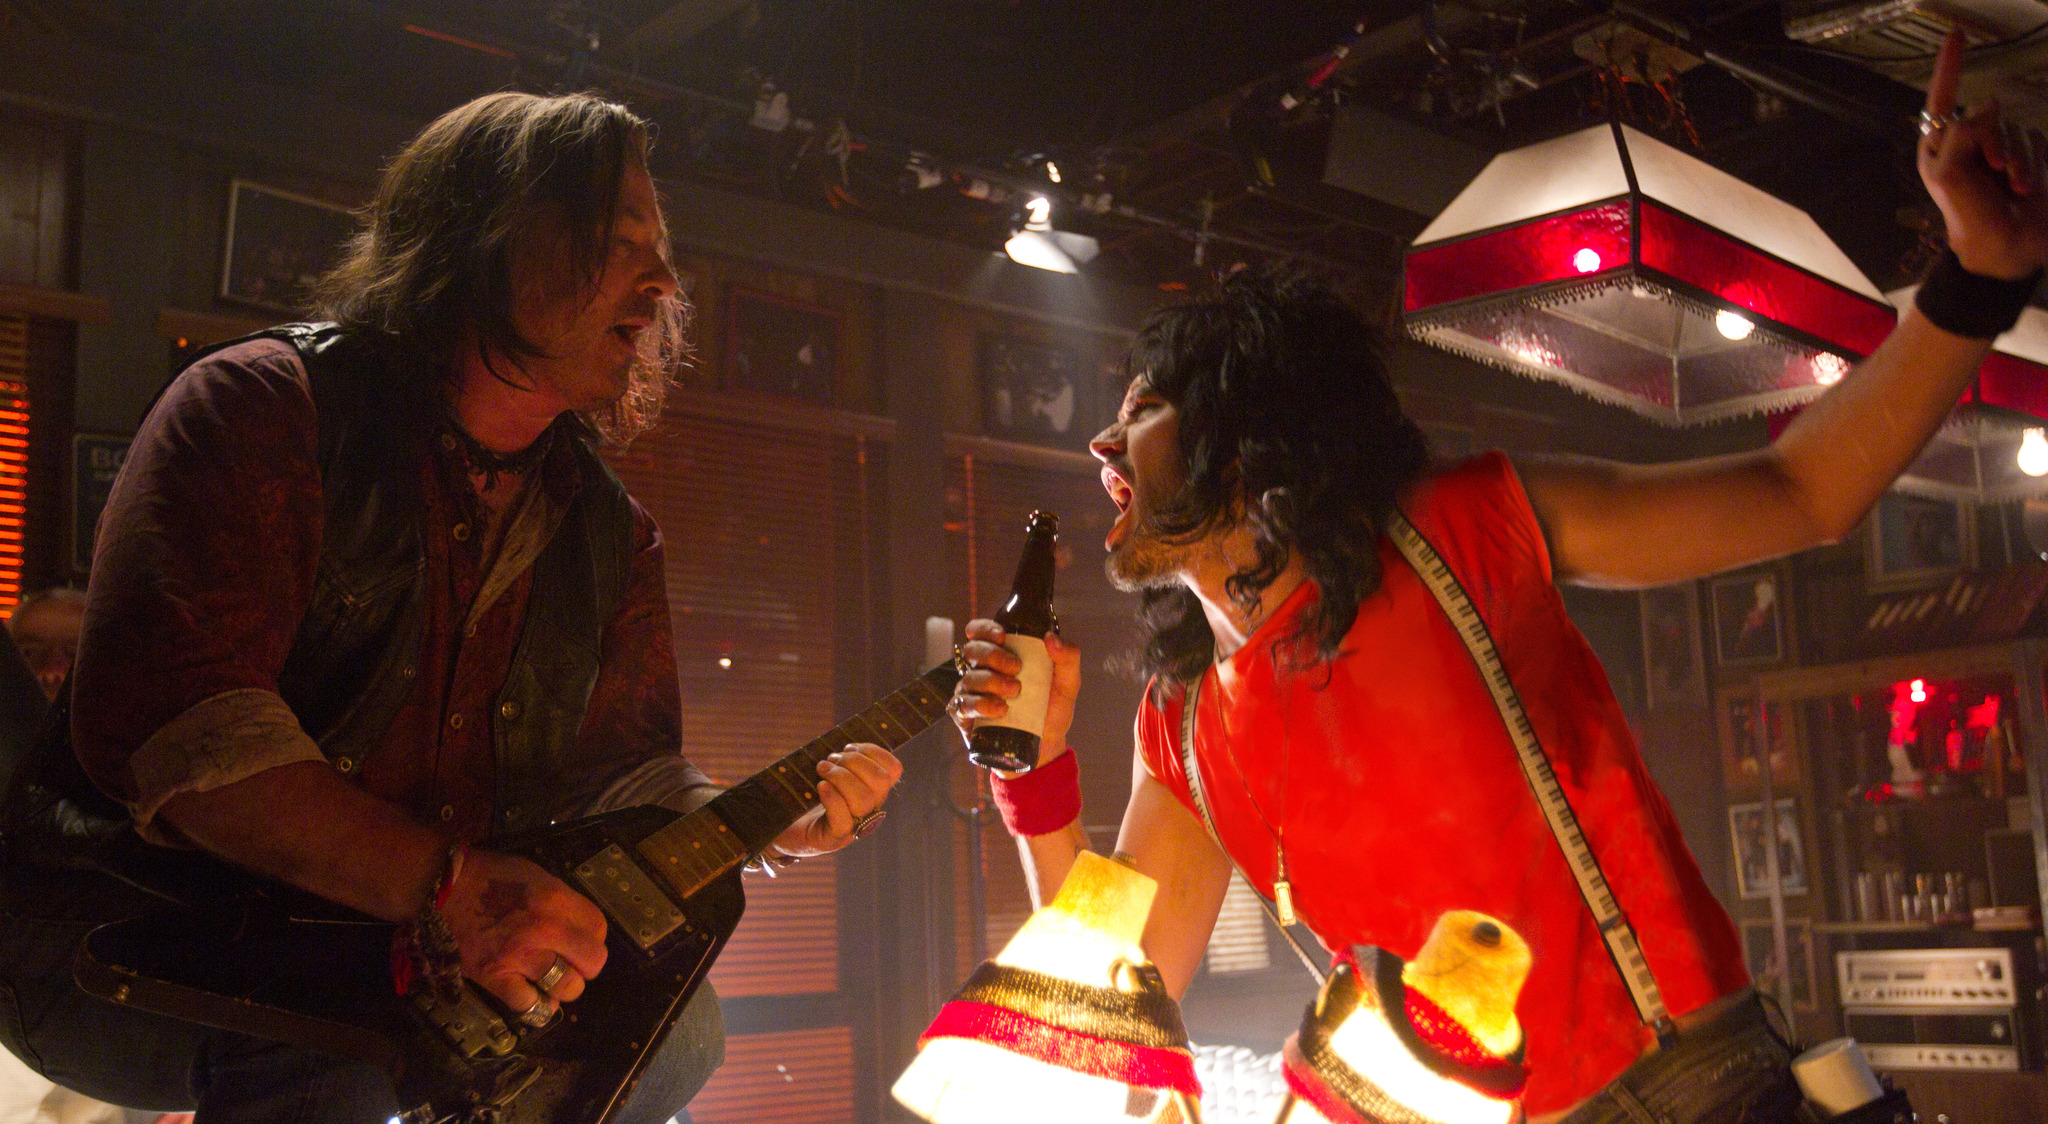 Still of Alec Baldwin and Russell Brand in Roko amzius (2012)